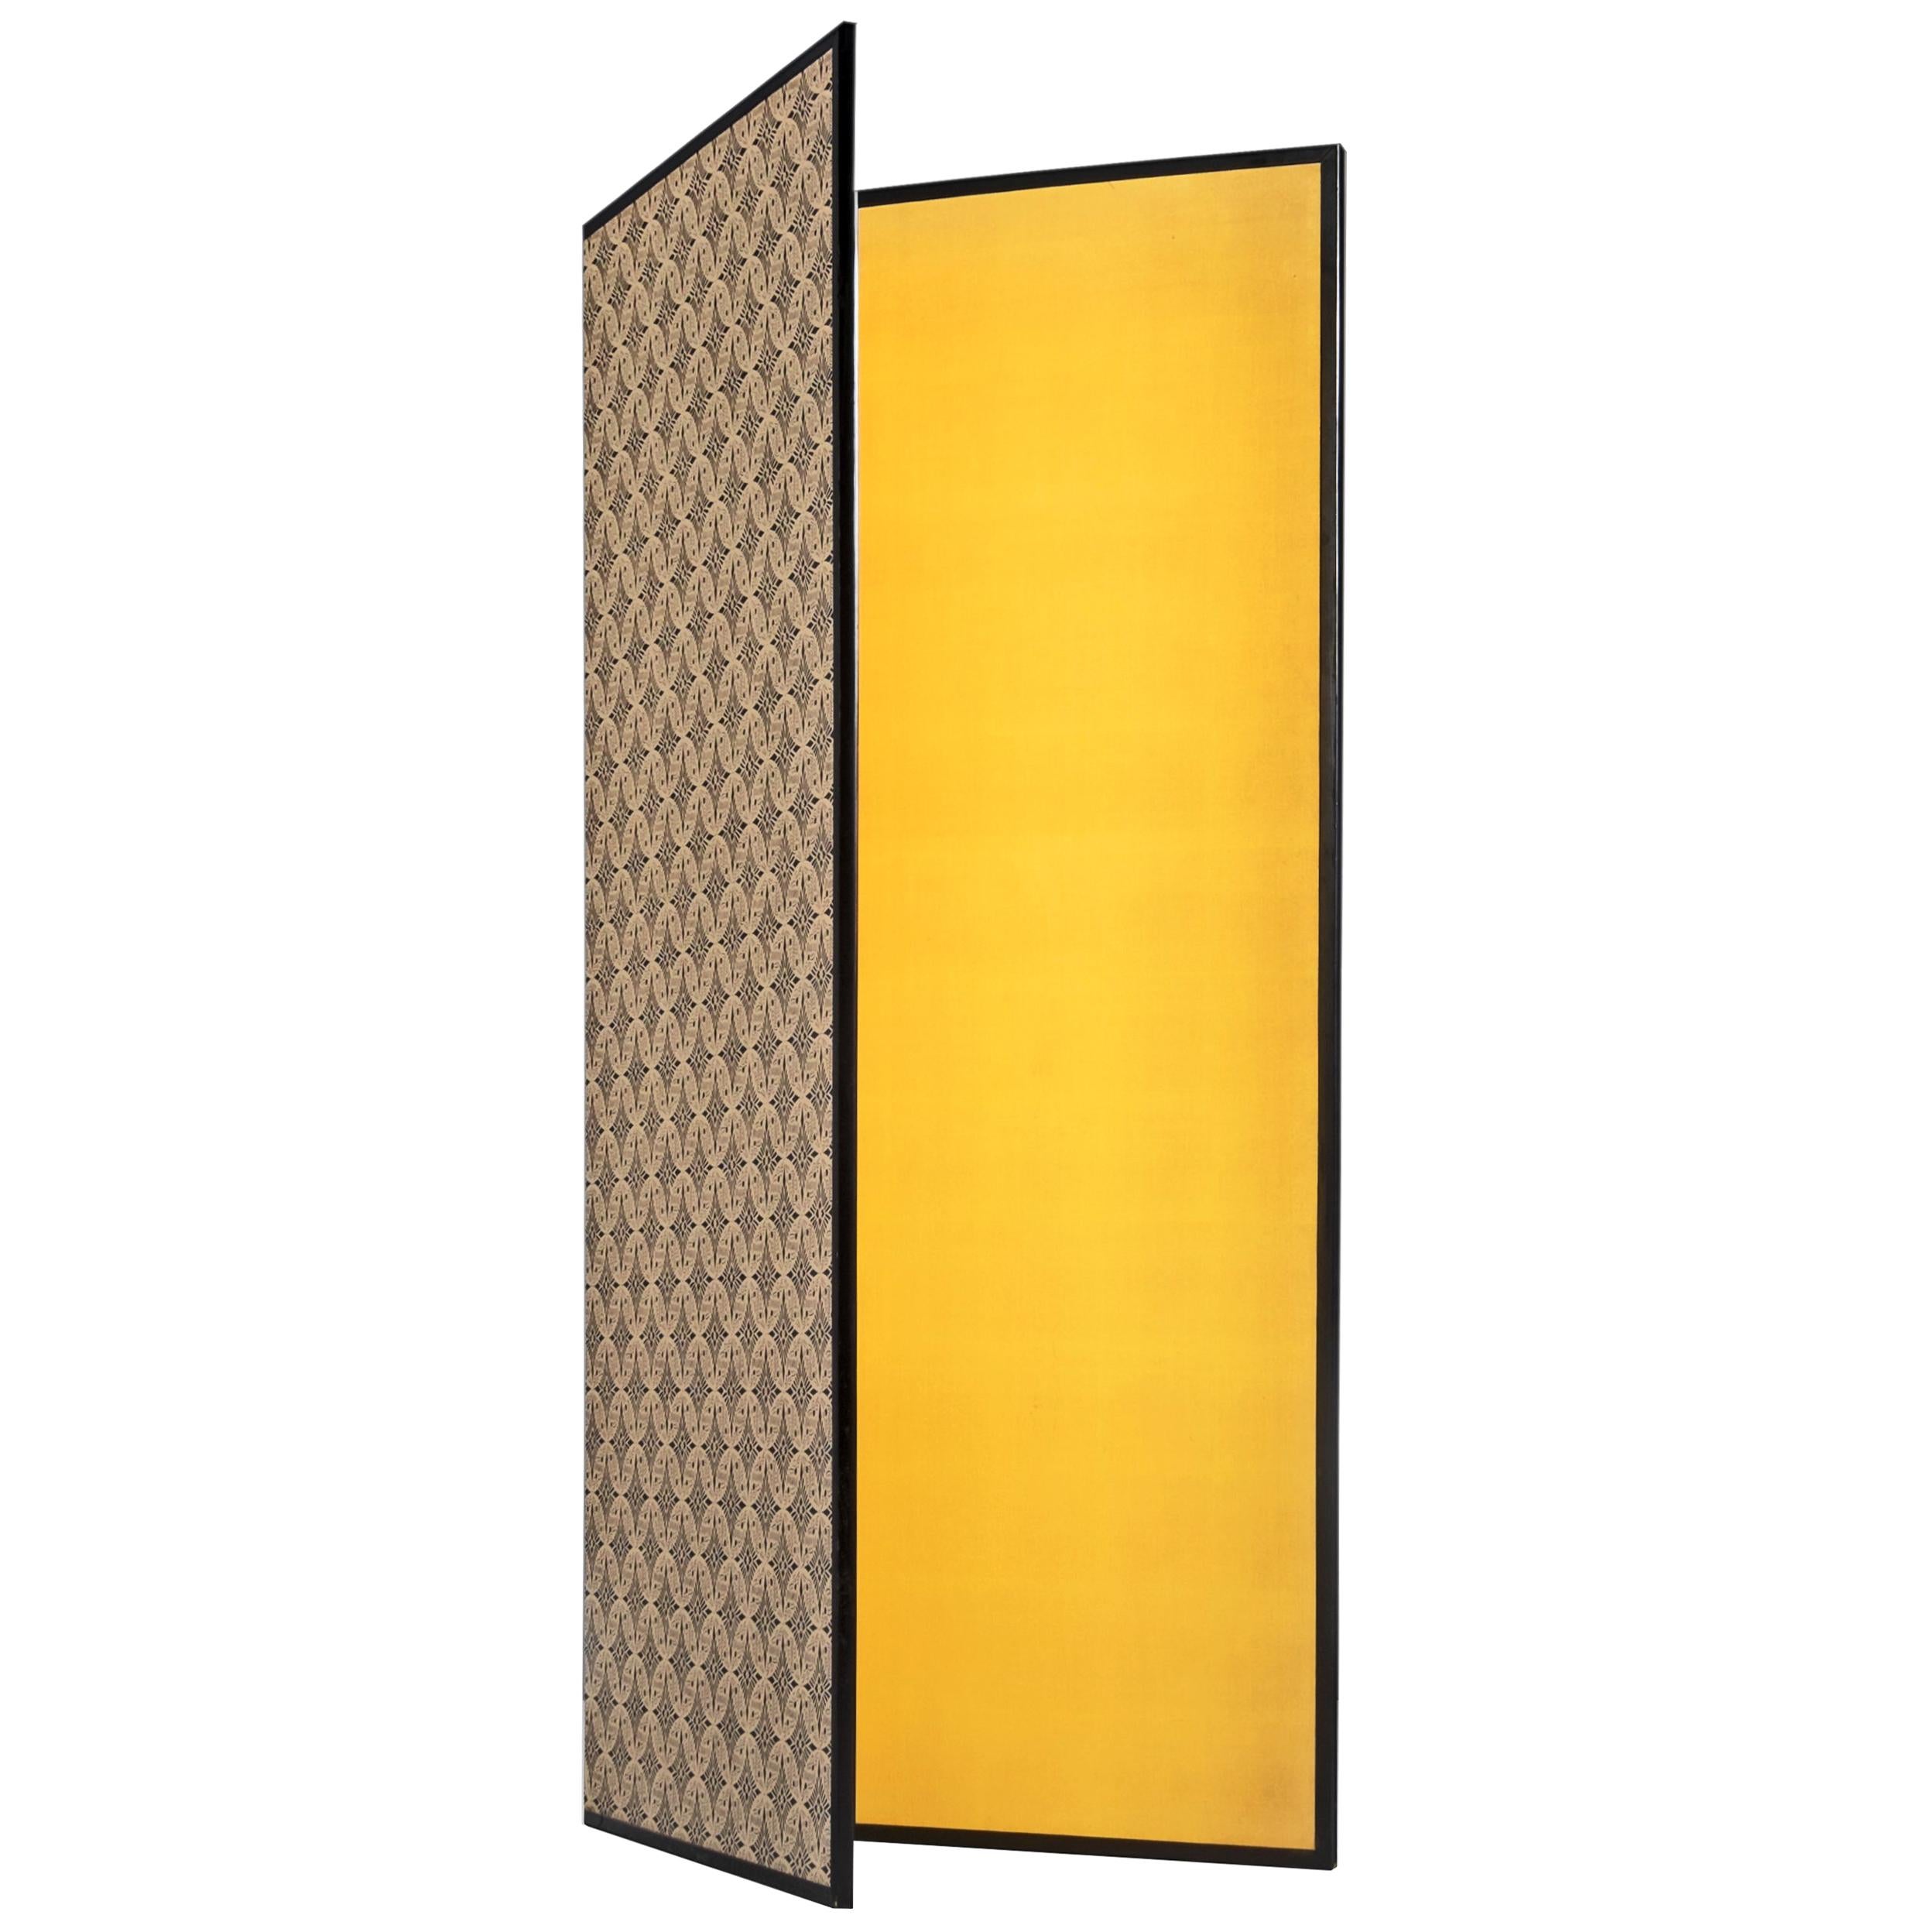 Gold Leaf Room Divider or Screen with Two Panels